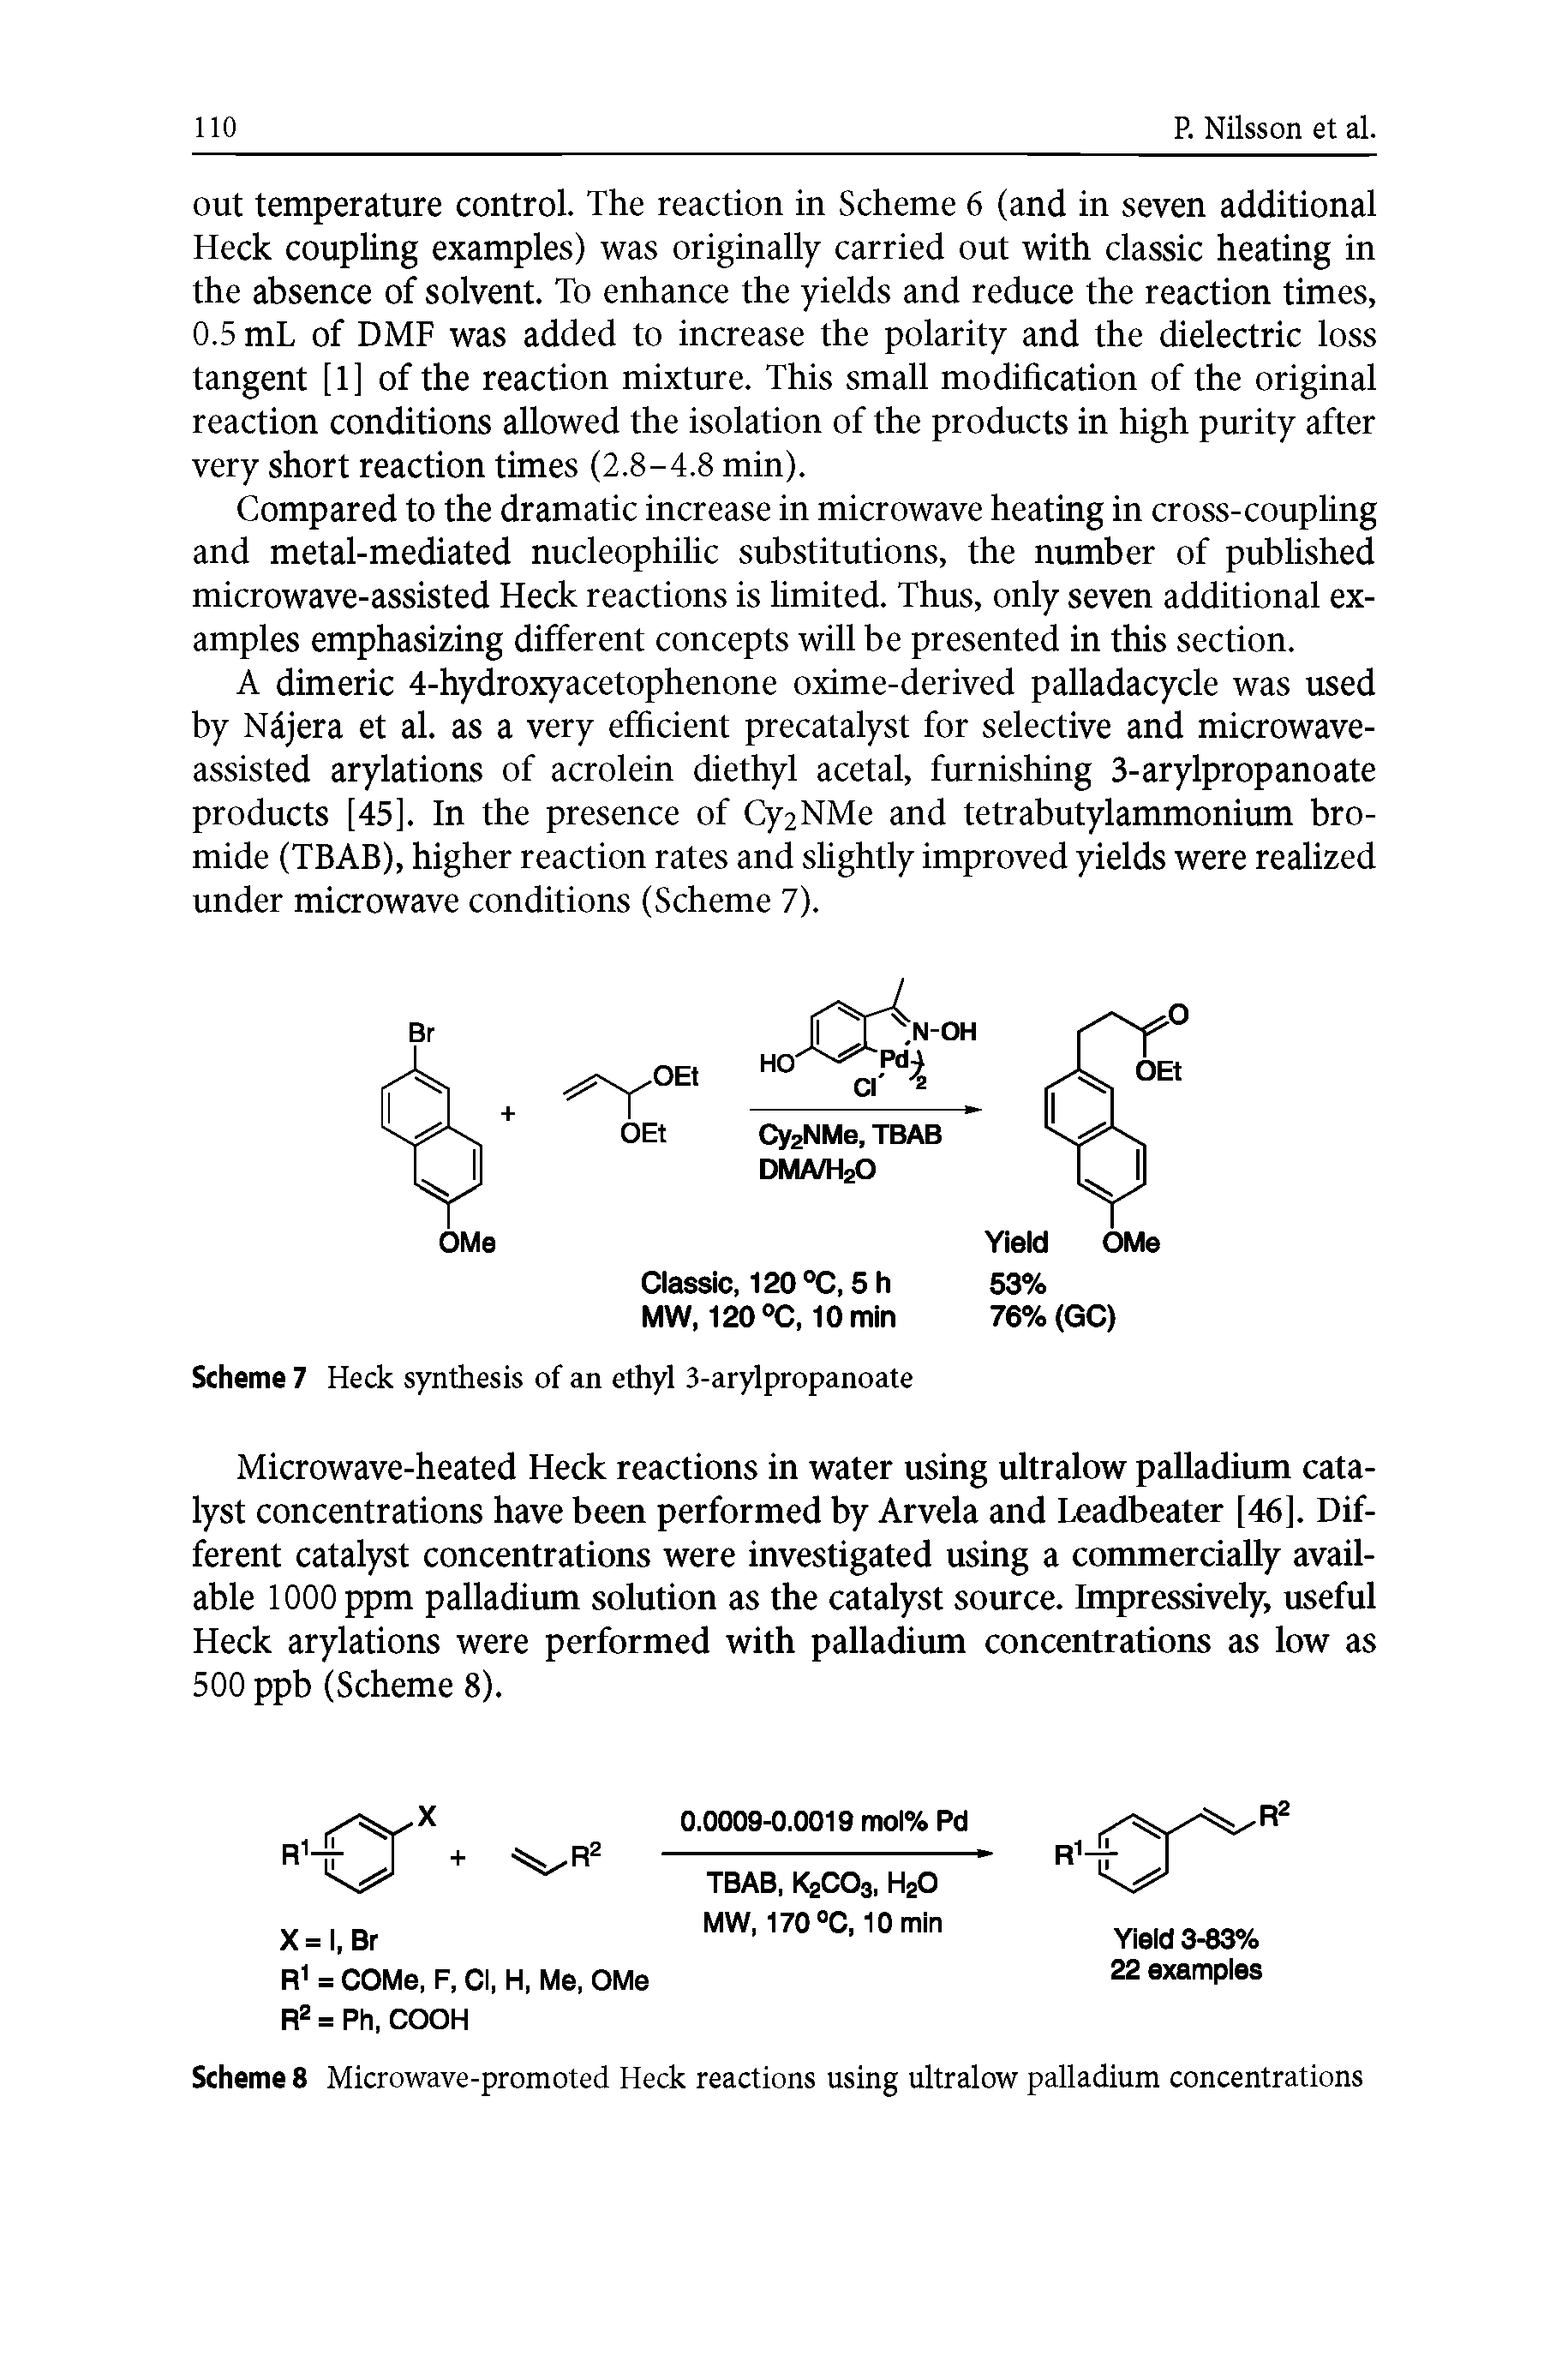 Scheme 8 Microwave-promoted Heck reactions using ultralow palladium concentrations...